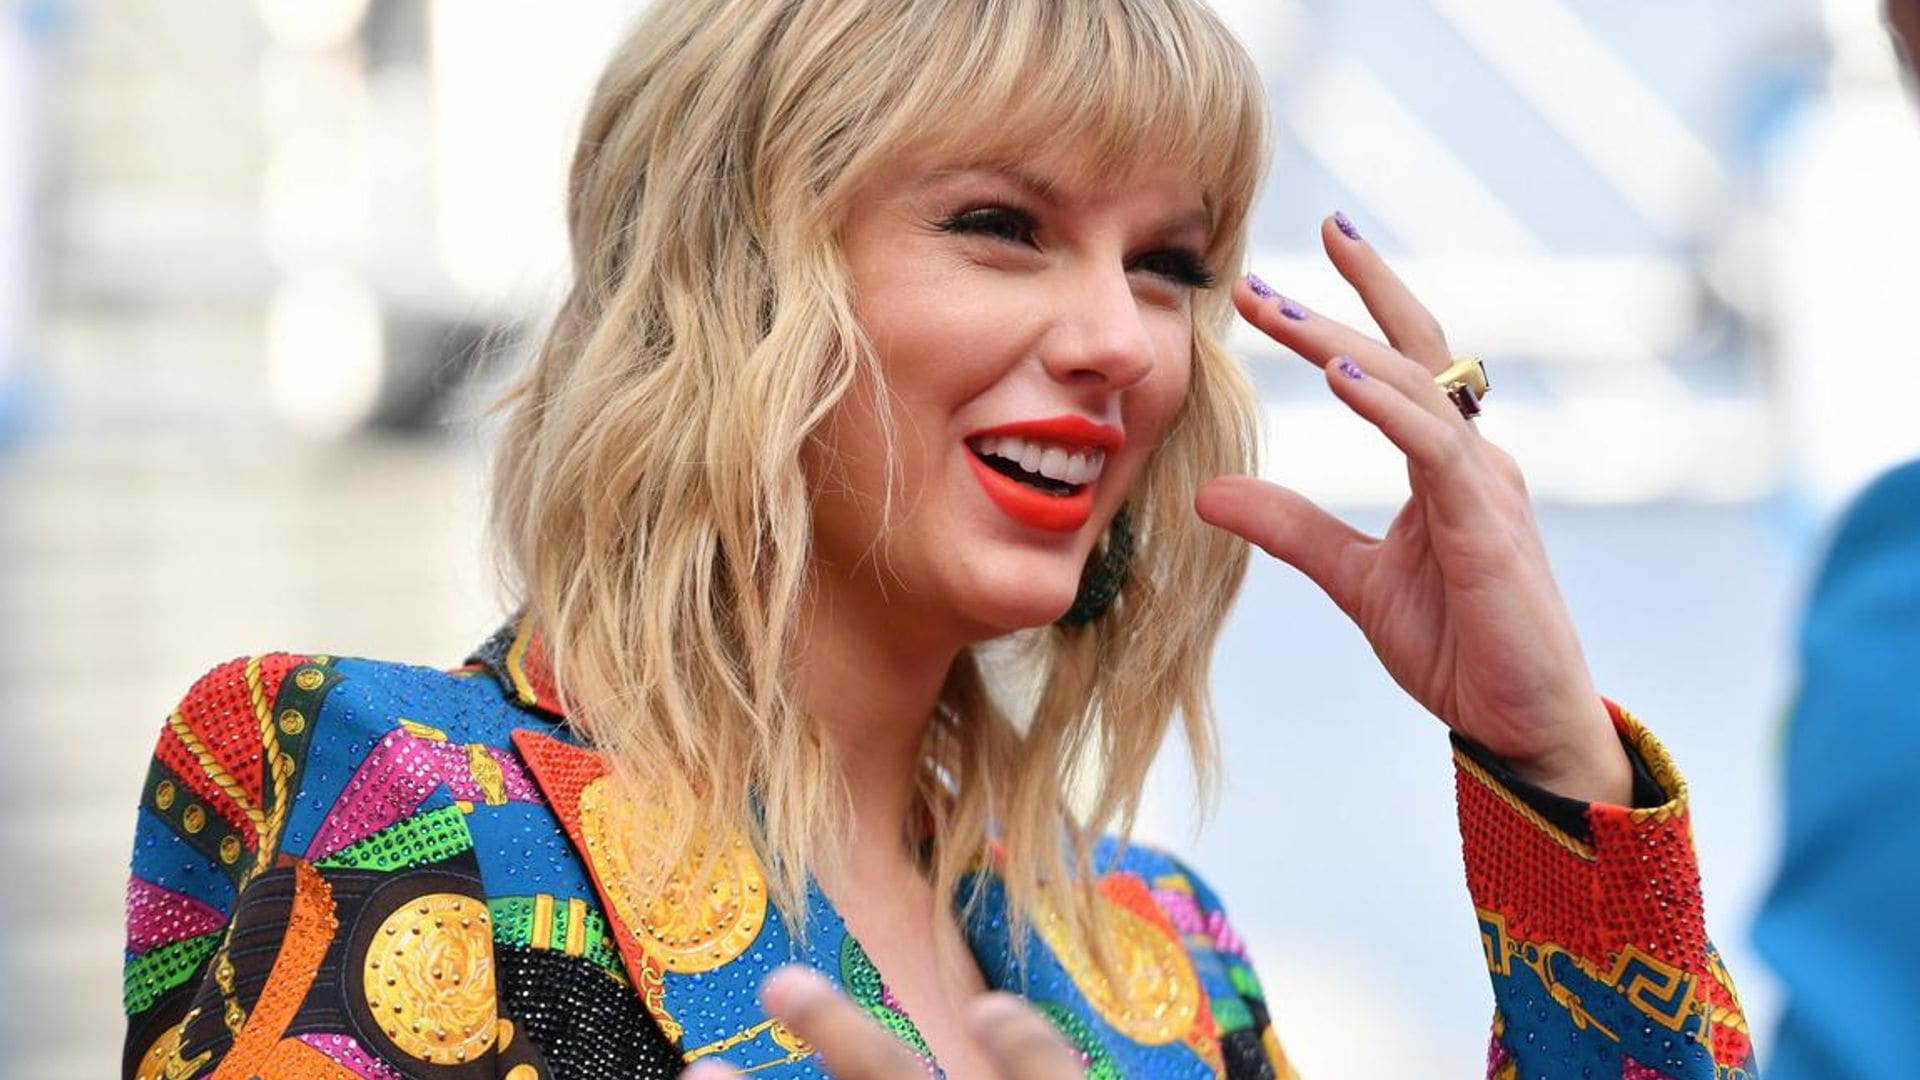 Taylor Swift breaks all the fashion rules with this manicure